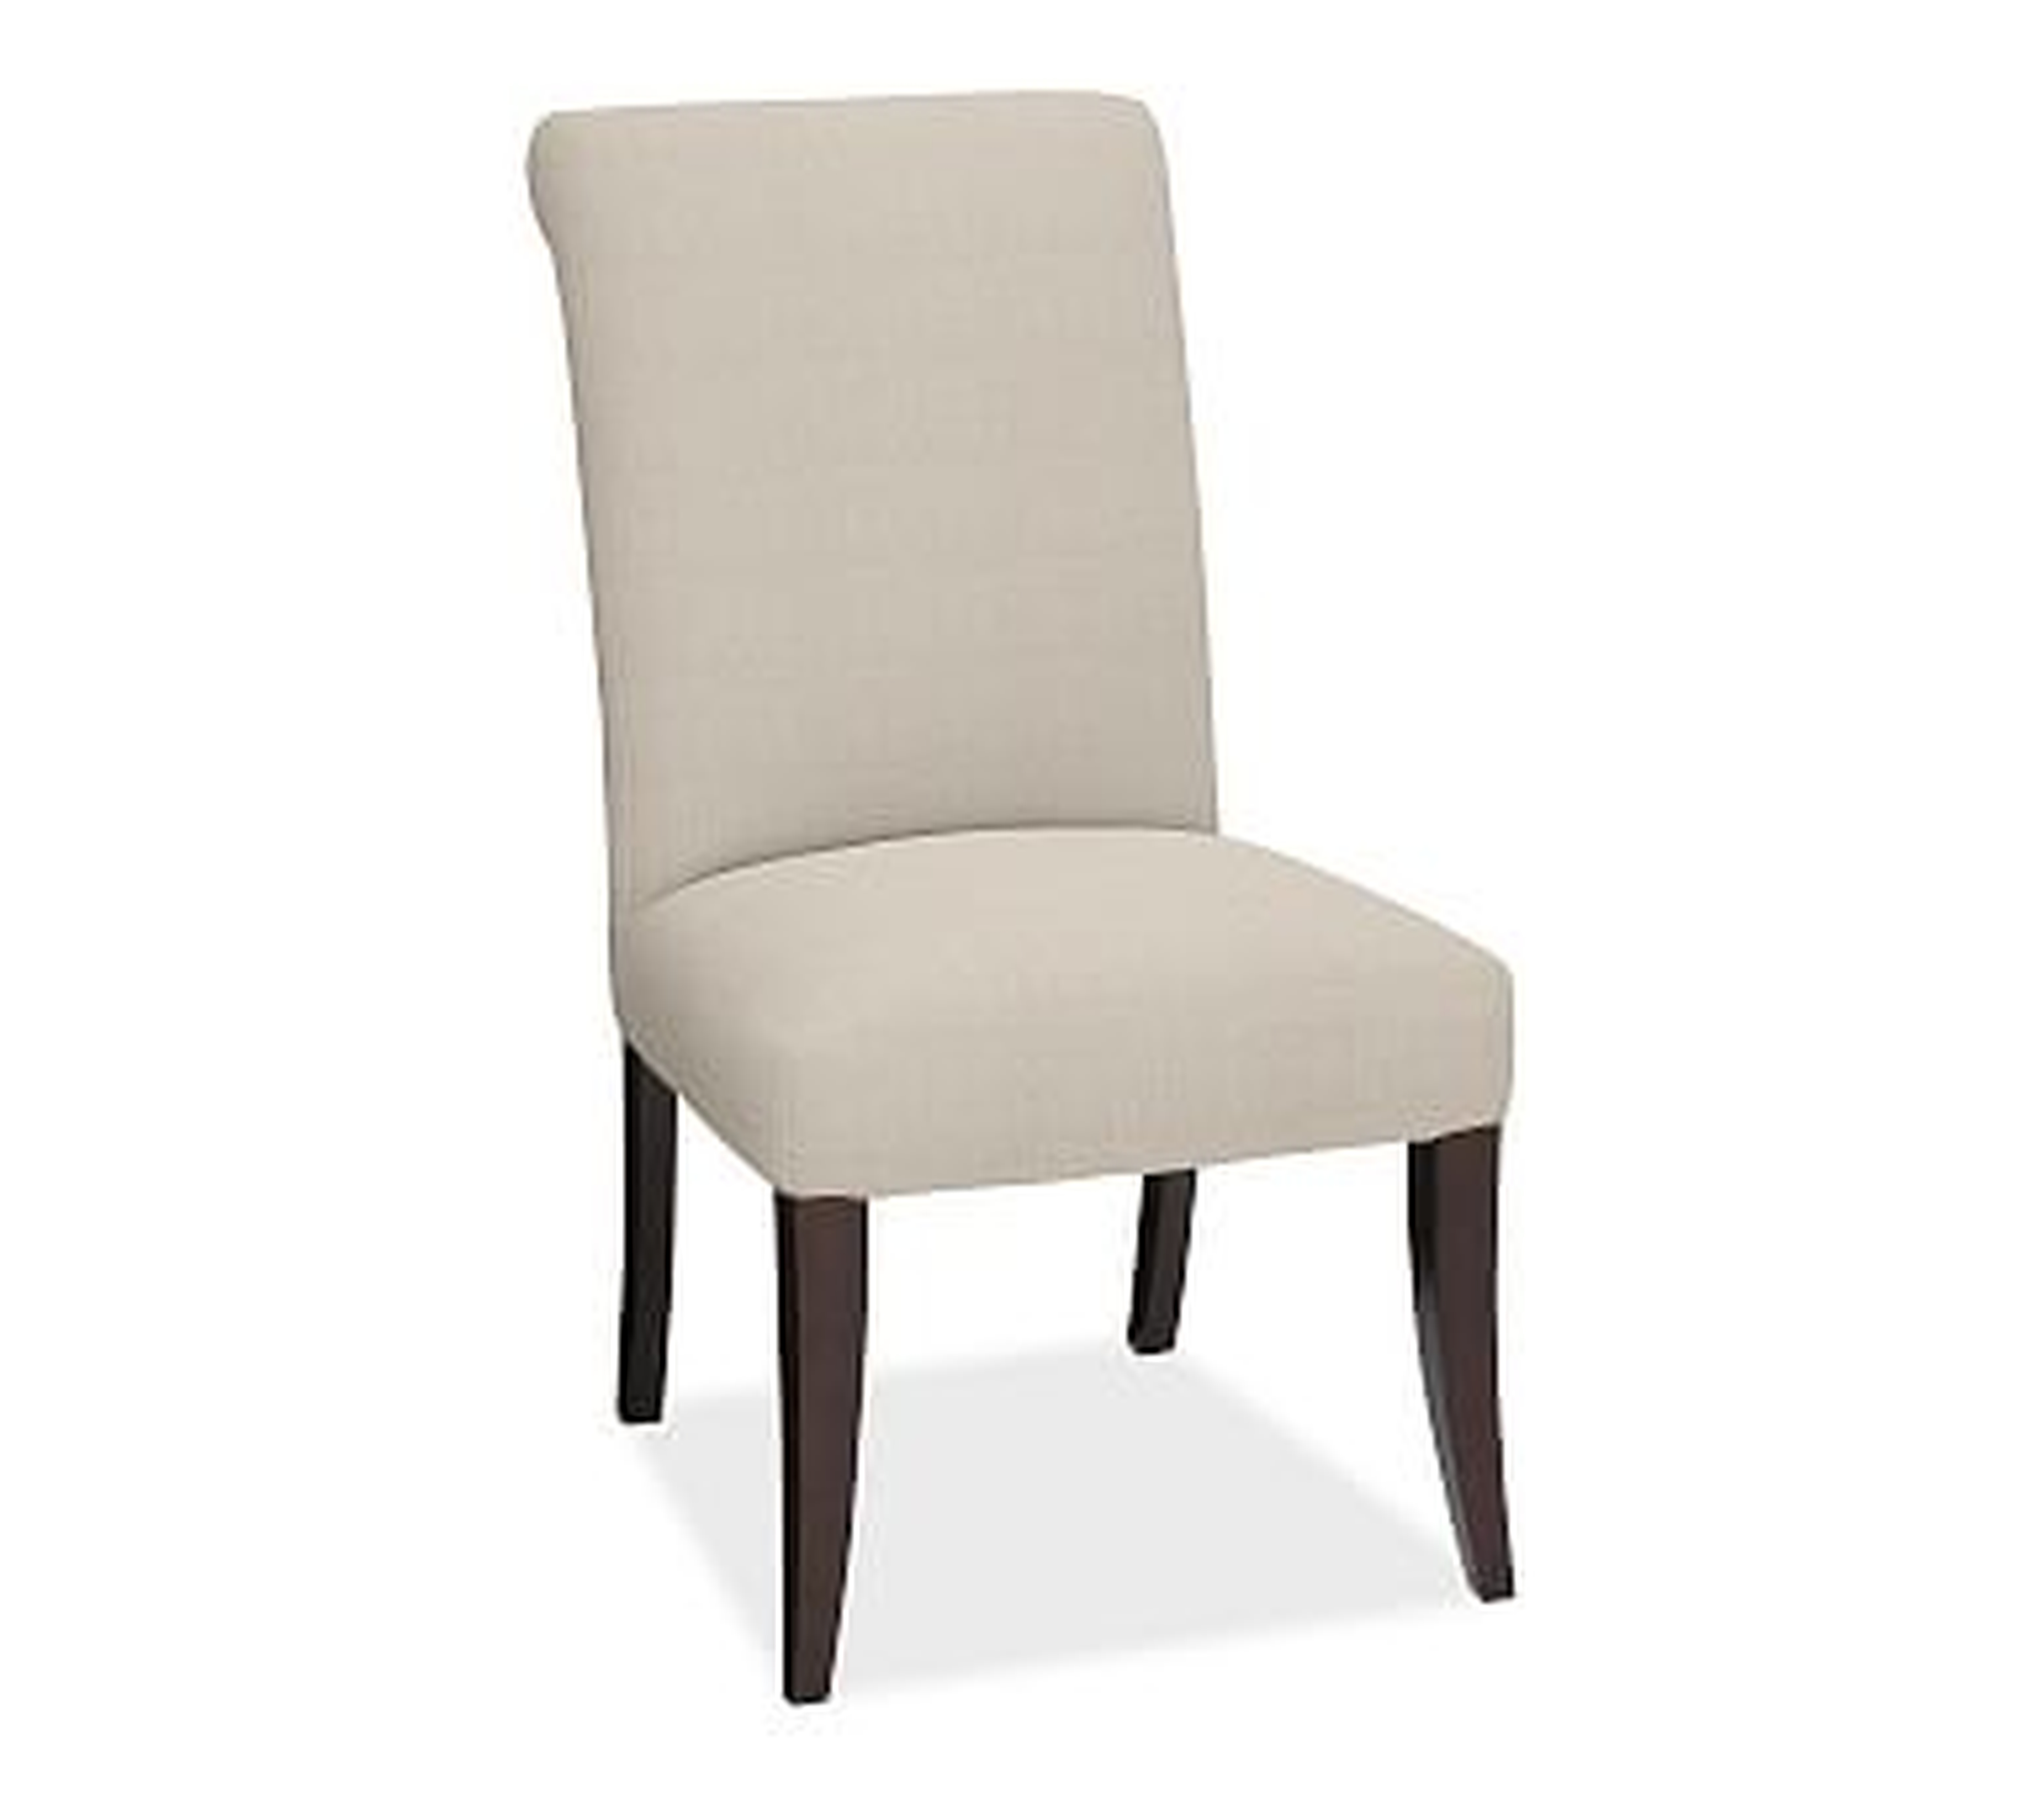 PB Comfort Roll Upholstered Dining Chair, Performance Everydaylinen(TM) Oatmeal, Espresso - Pottery Barn